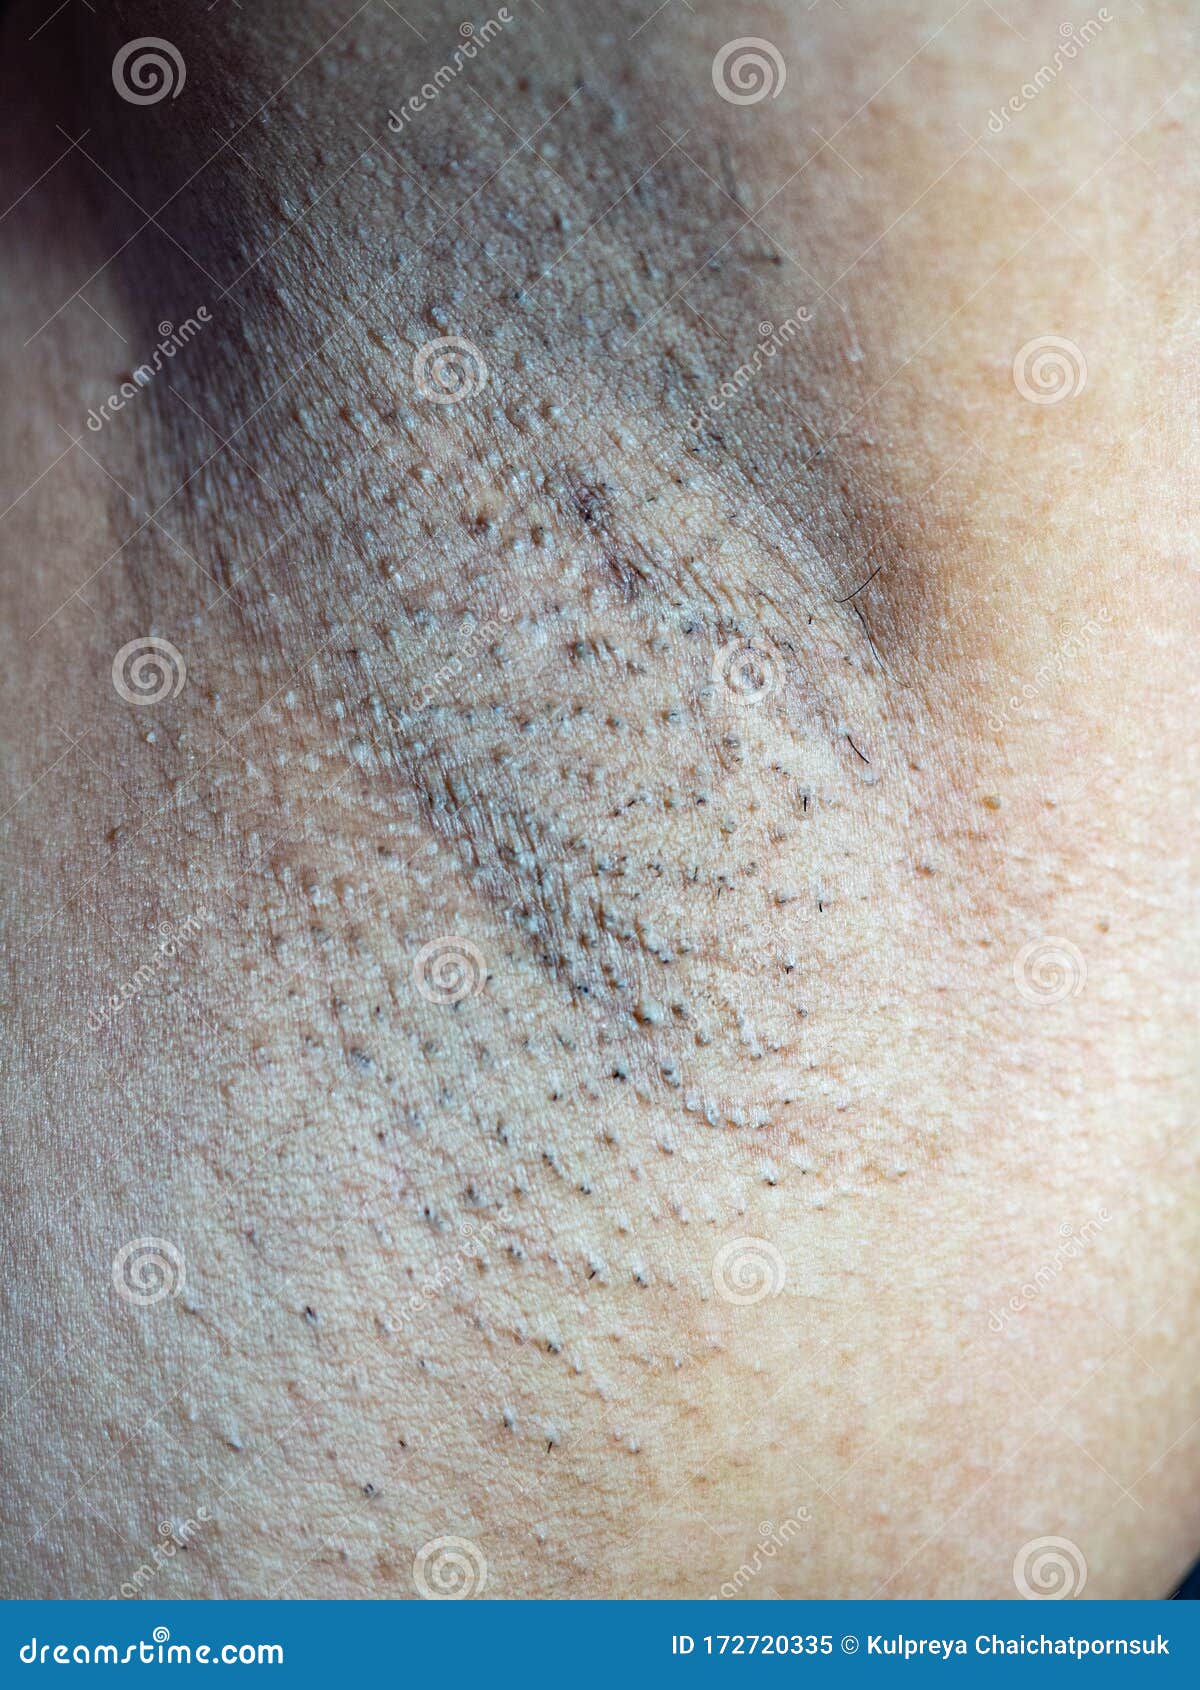 Underarm Black Patches,the Skin is Not Smooth,Has Short Hairs. Stock Image  - Image of hairs, pattern: 172720335